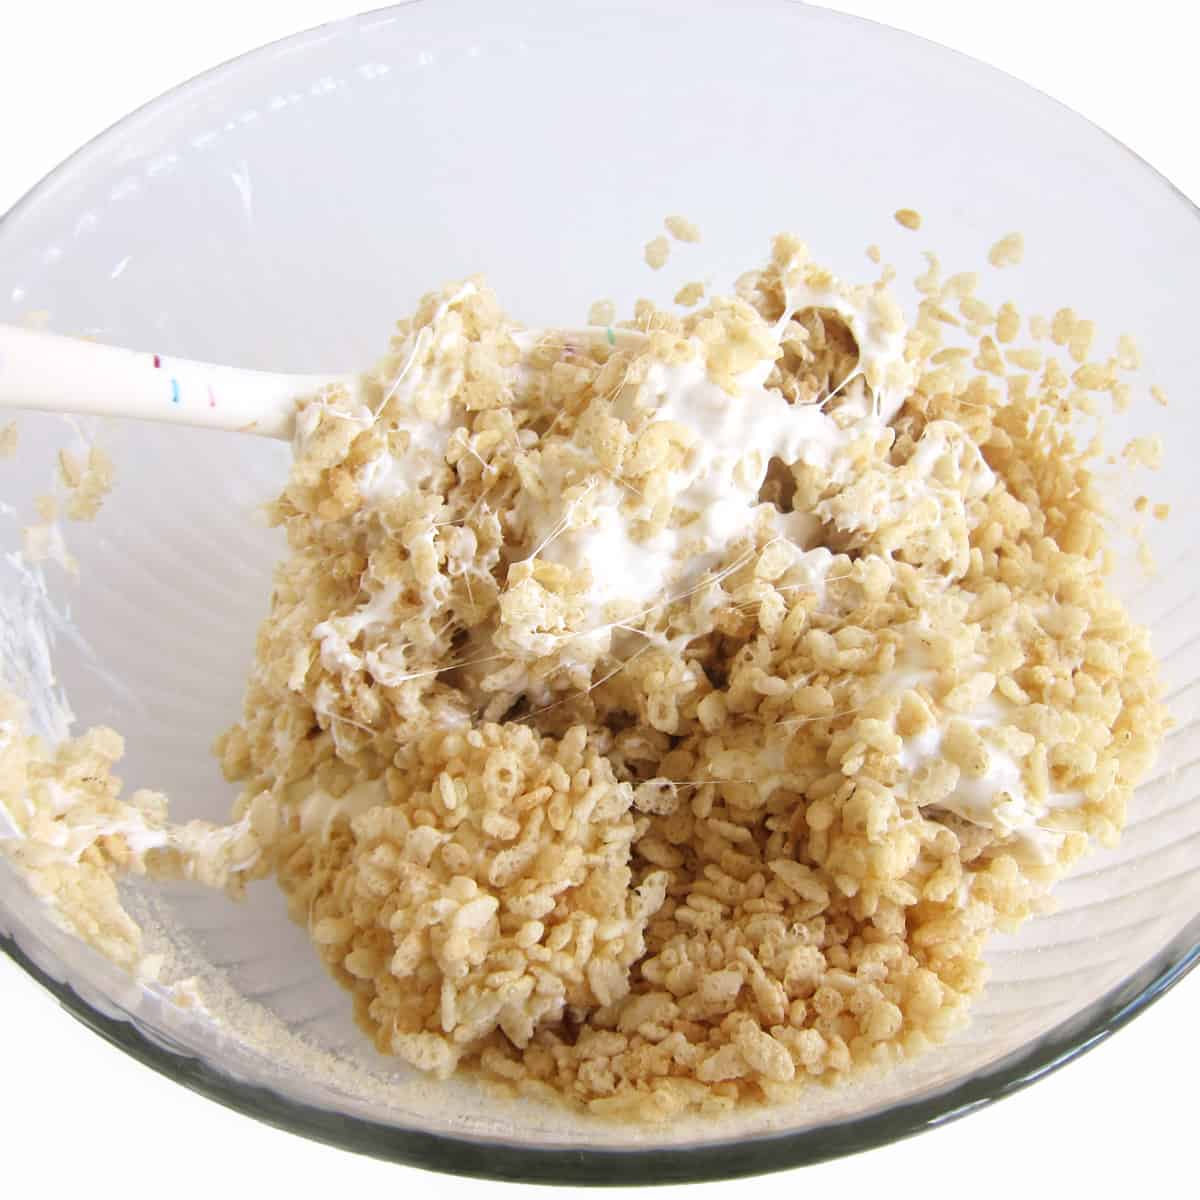 Mixing dairy-free rice krispies treats in a mixing bowl.